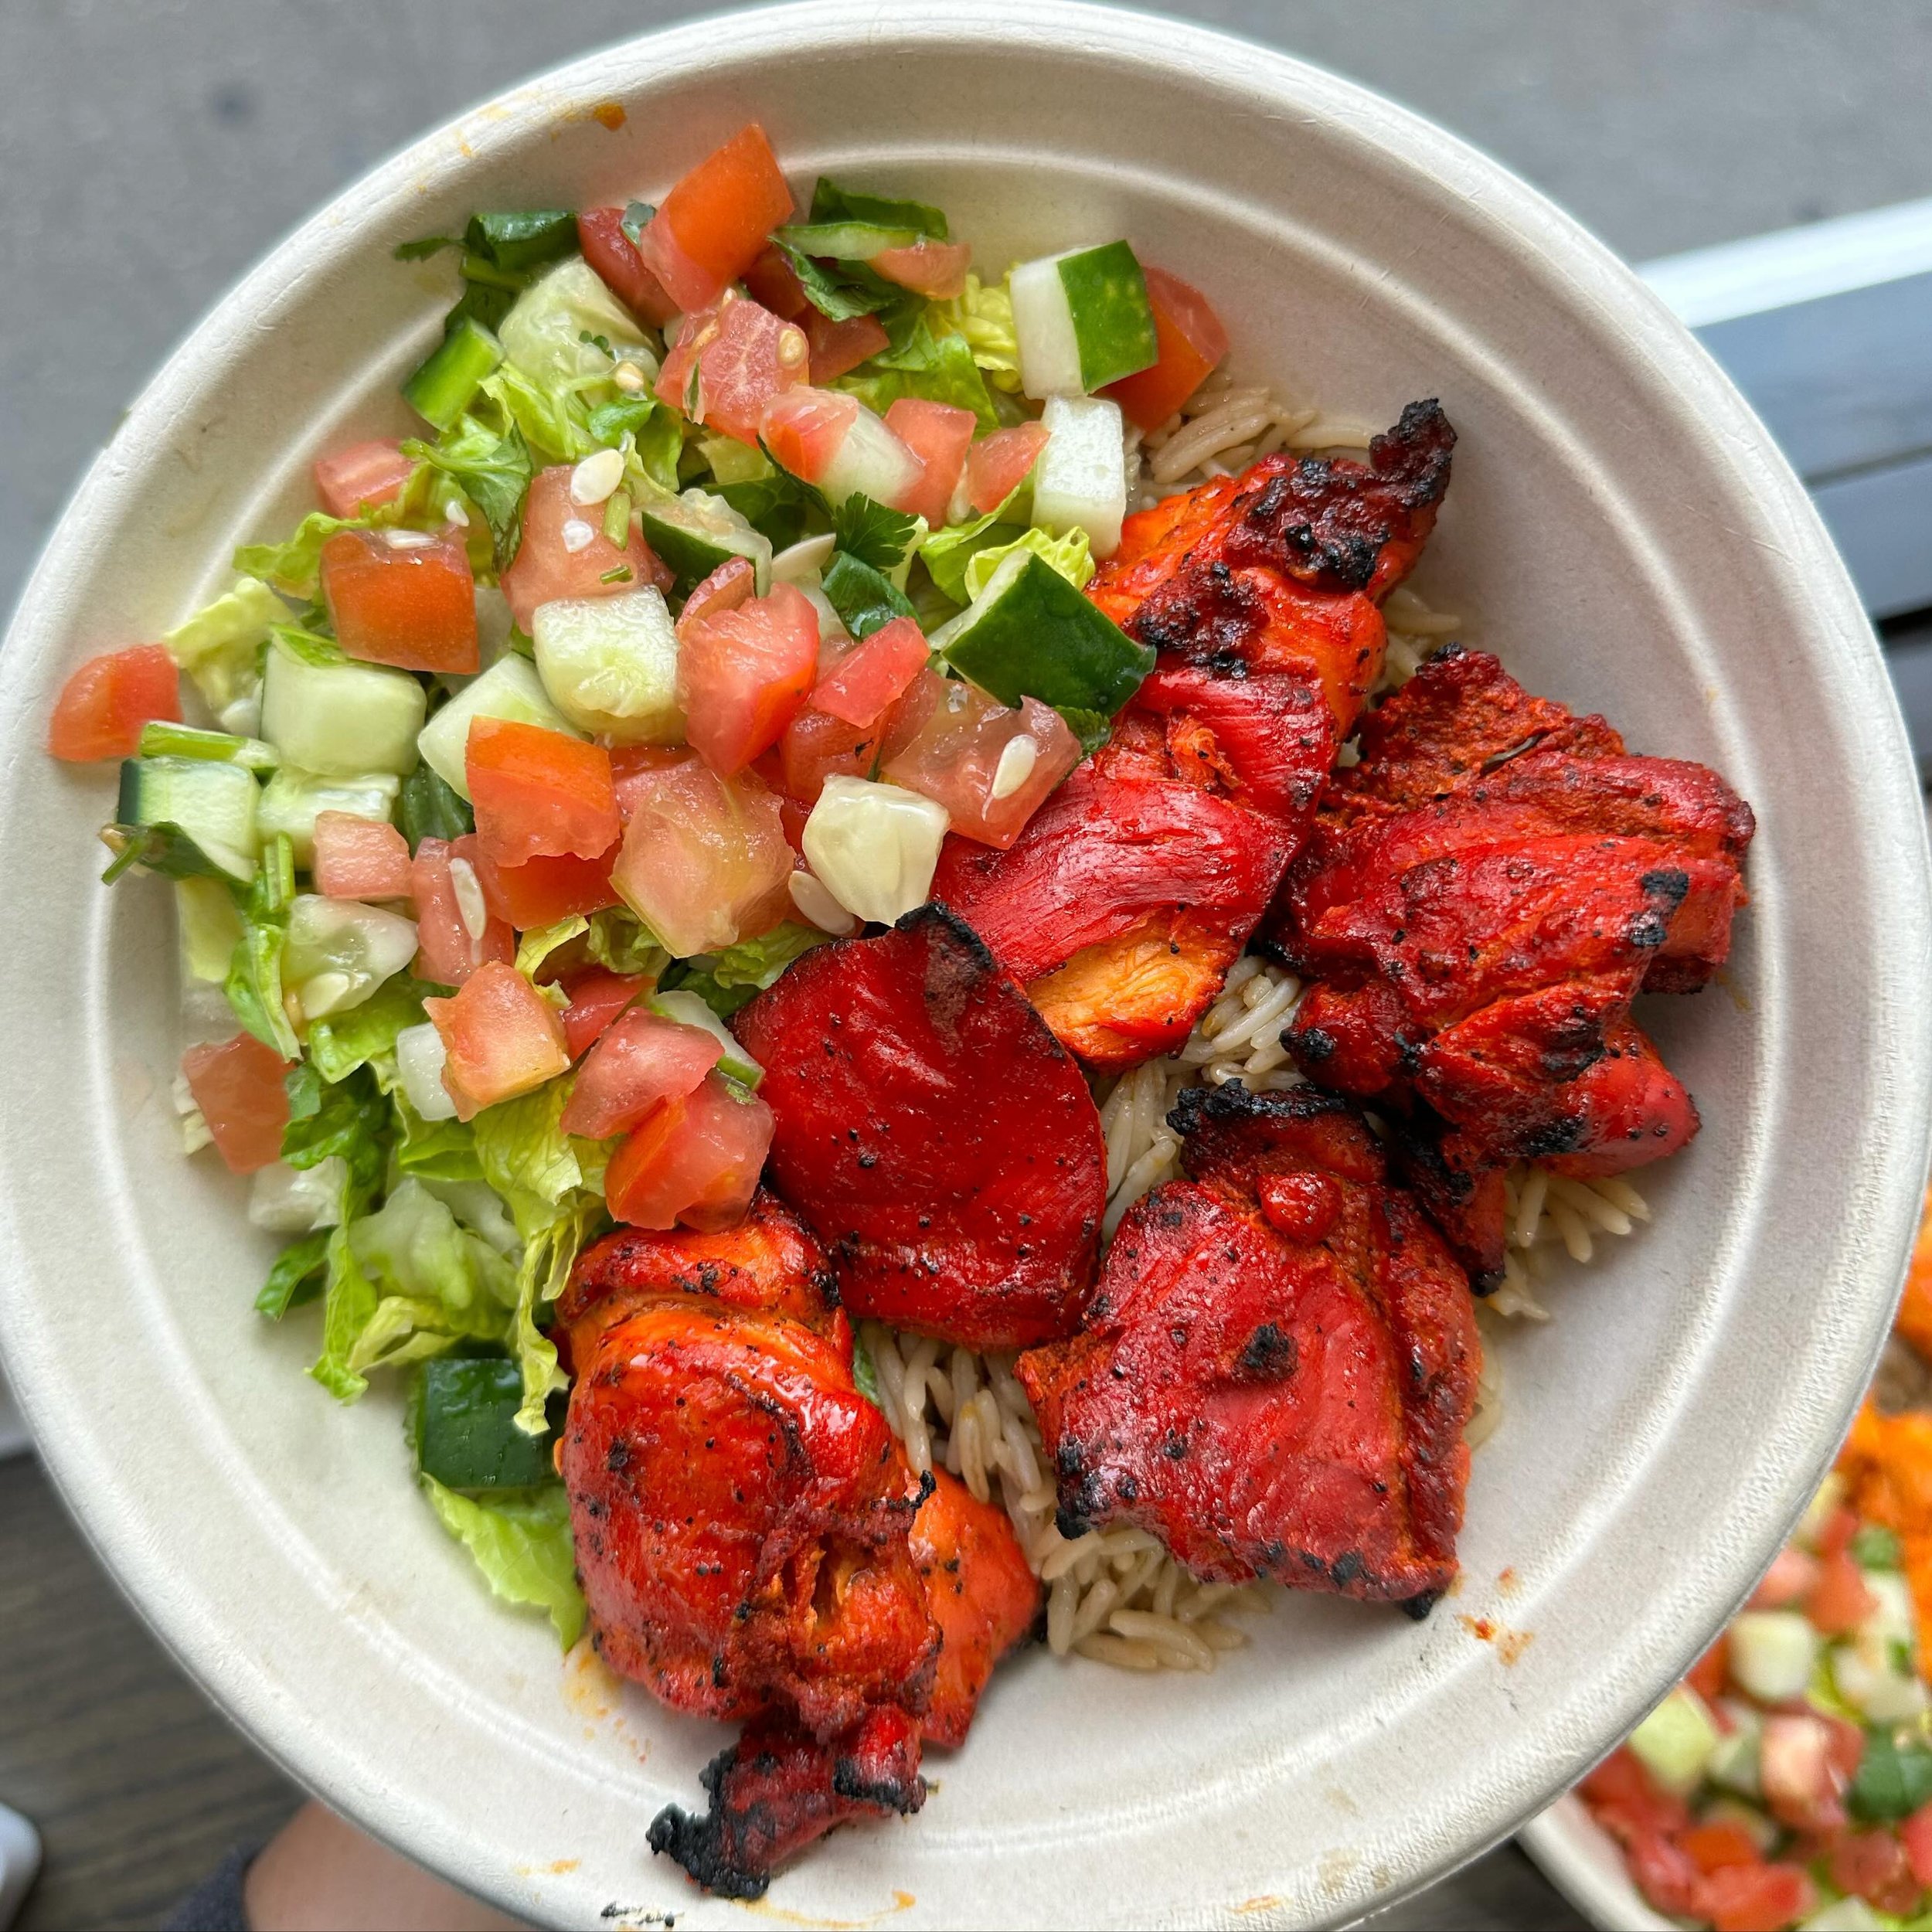 The weather is warming up which means you need to stop by our 235 Bleecker street location right in the west village and grab yourself a platter!

‼️FOLLOW @kebabexpresshalalgrill FOR MORE INCREDIBLE EATS‼️

#halal #kebab #food #foodie #nyc #newforkc